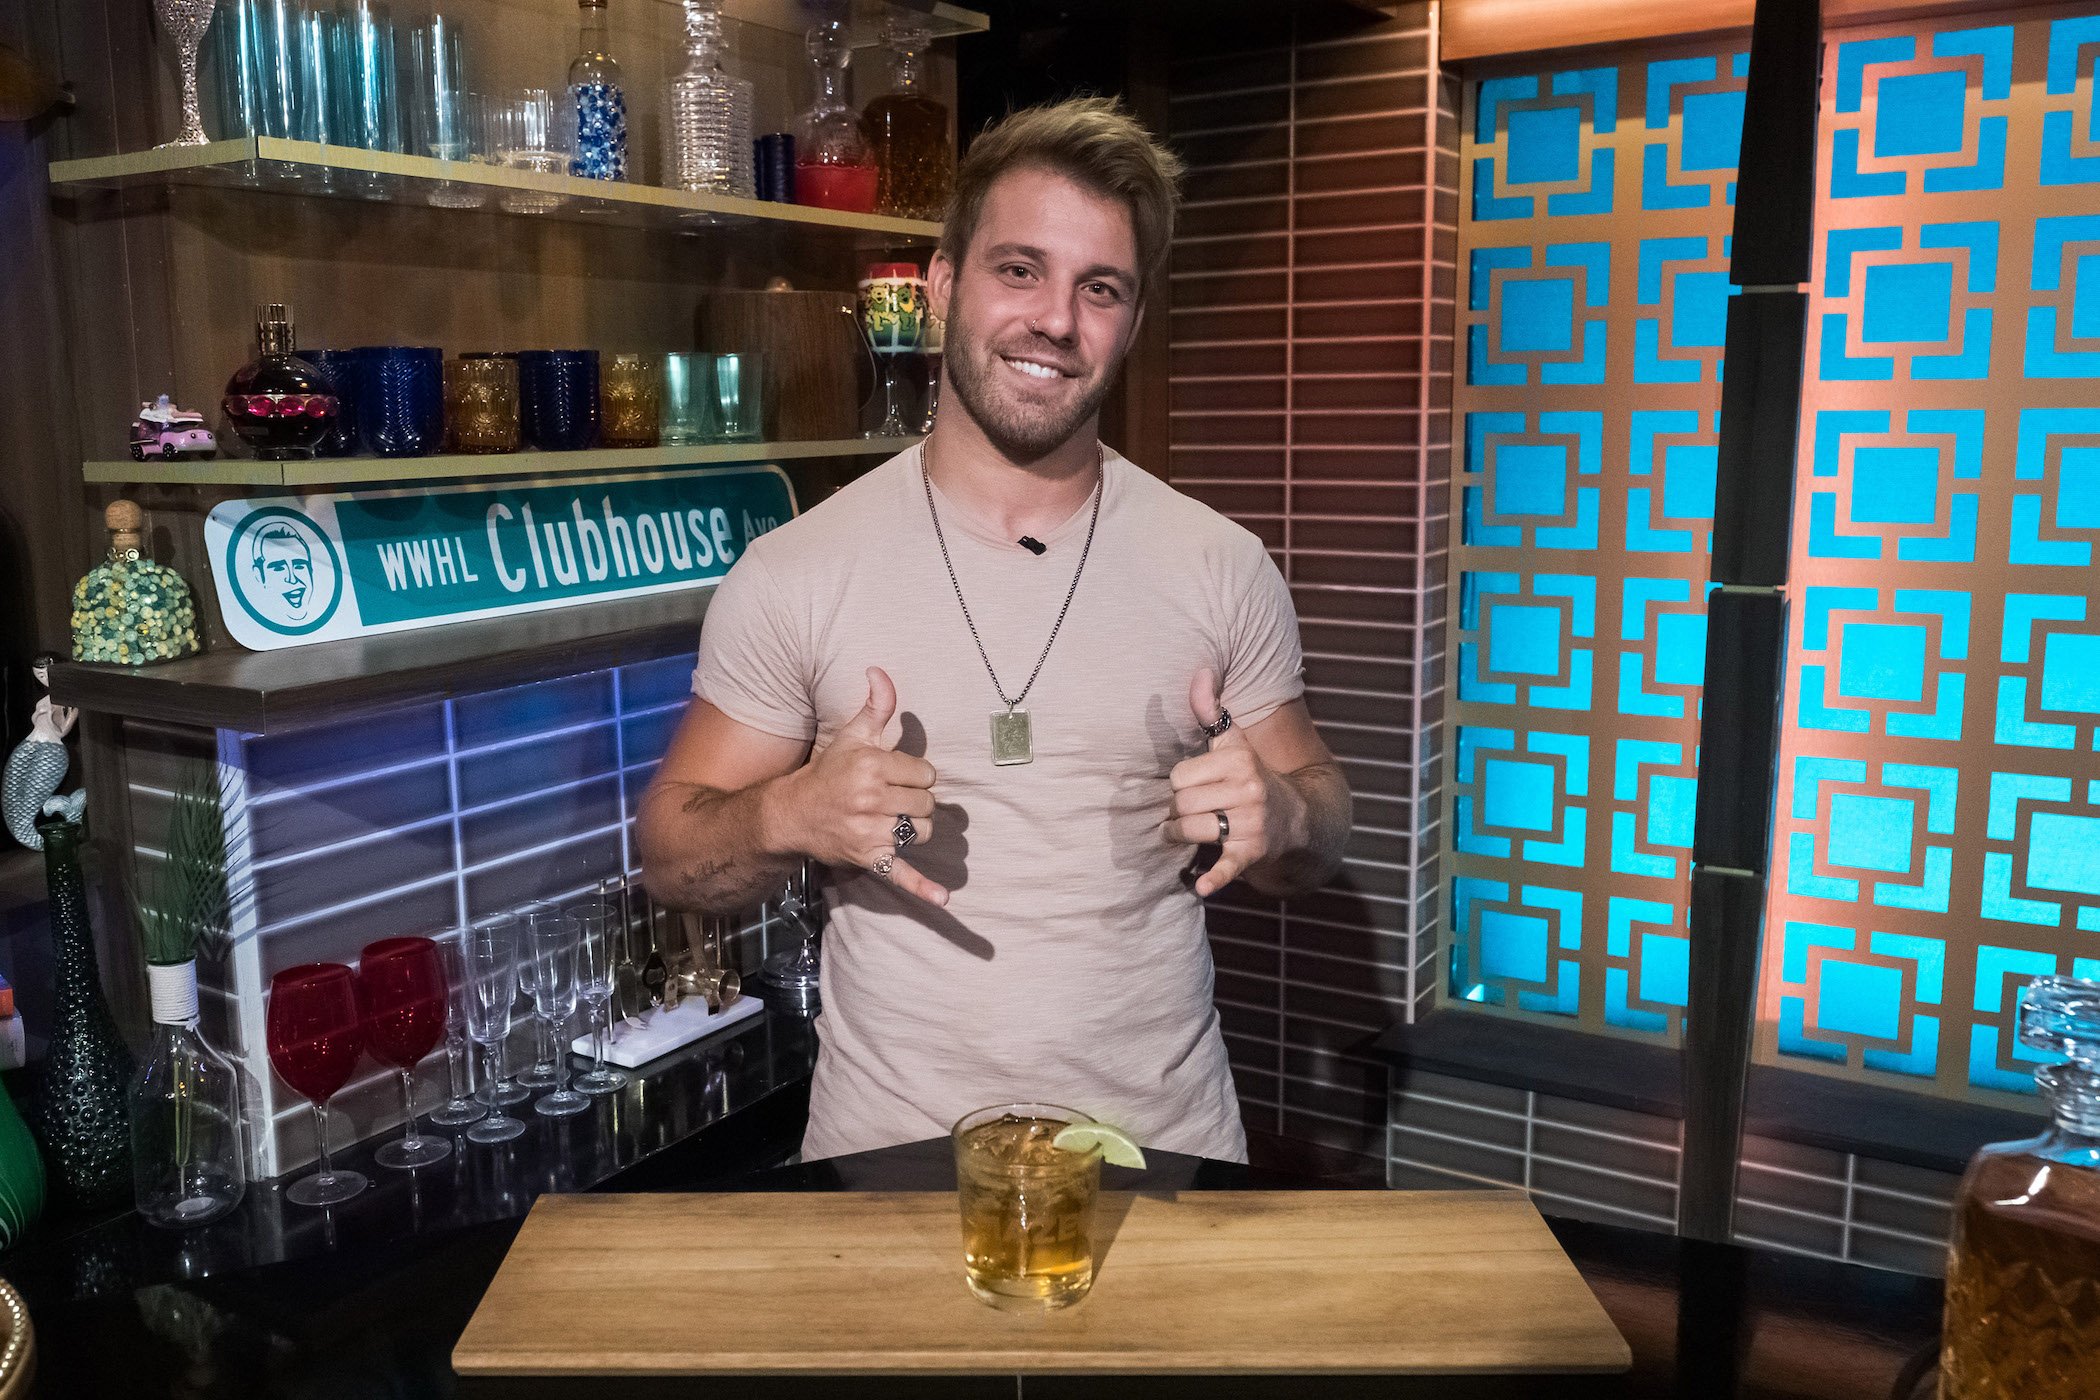 Paulie Calafiore from MTV's 'The Challenge' smiling at the camera